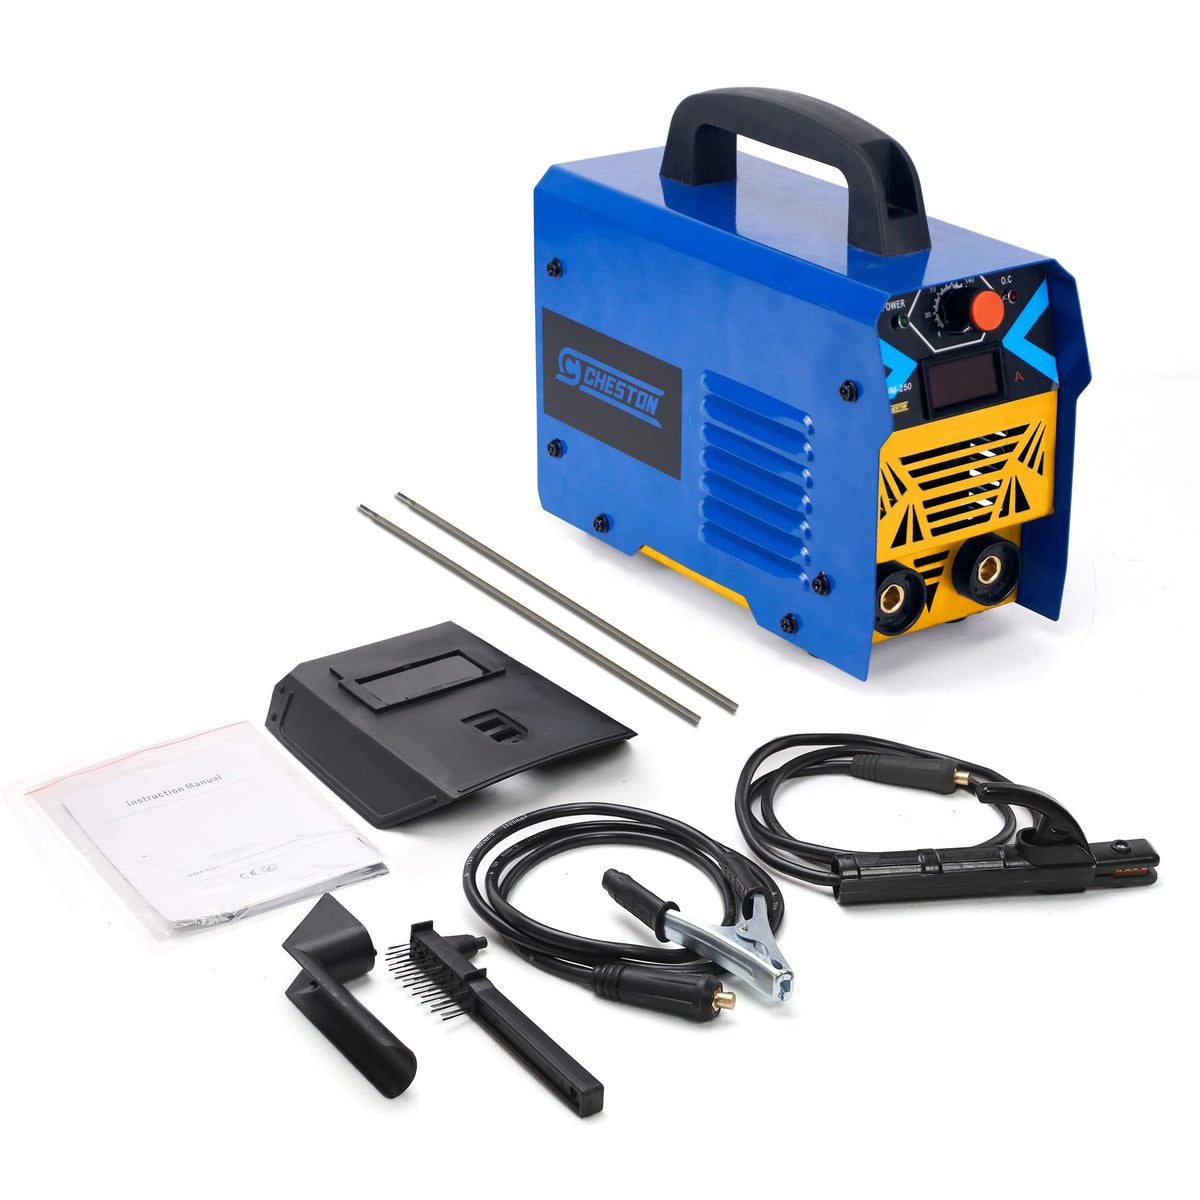 Cheston CHWM-250 Inverter Welding Machine LED Display Hot Start Welder Tool with Welding Cables, Goggles, Welding Rods & Other Accessories